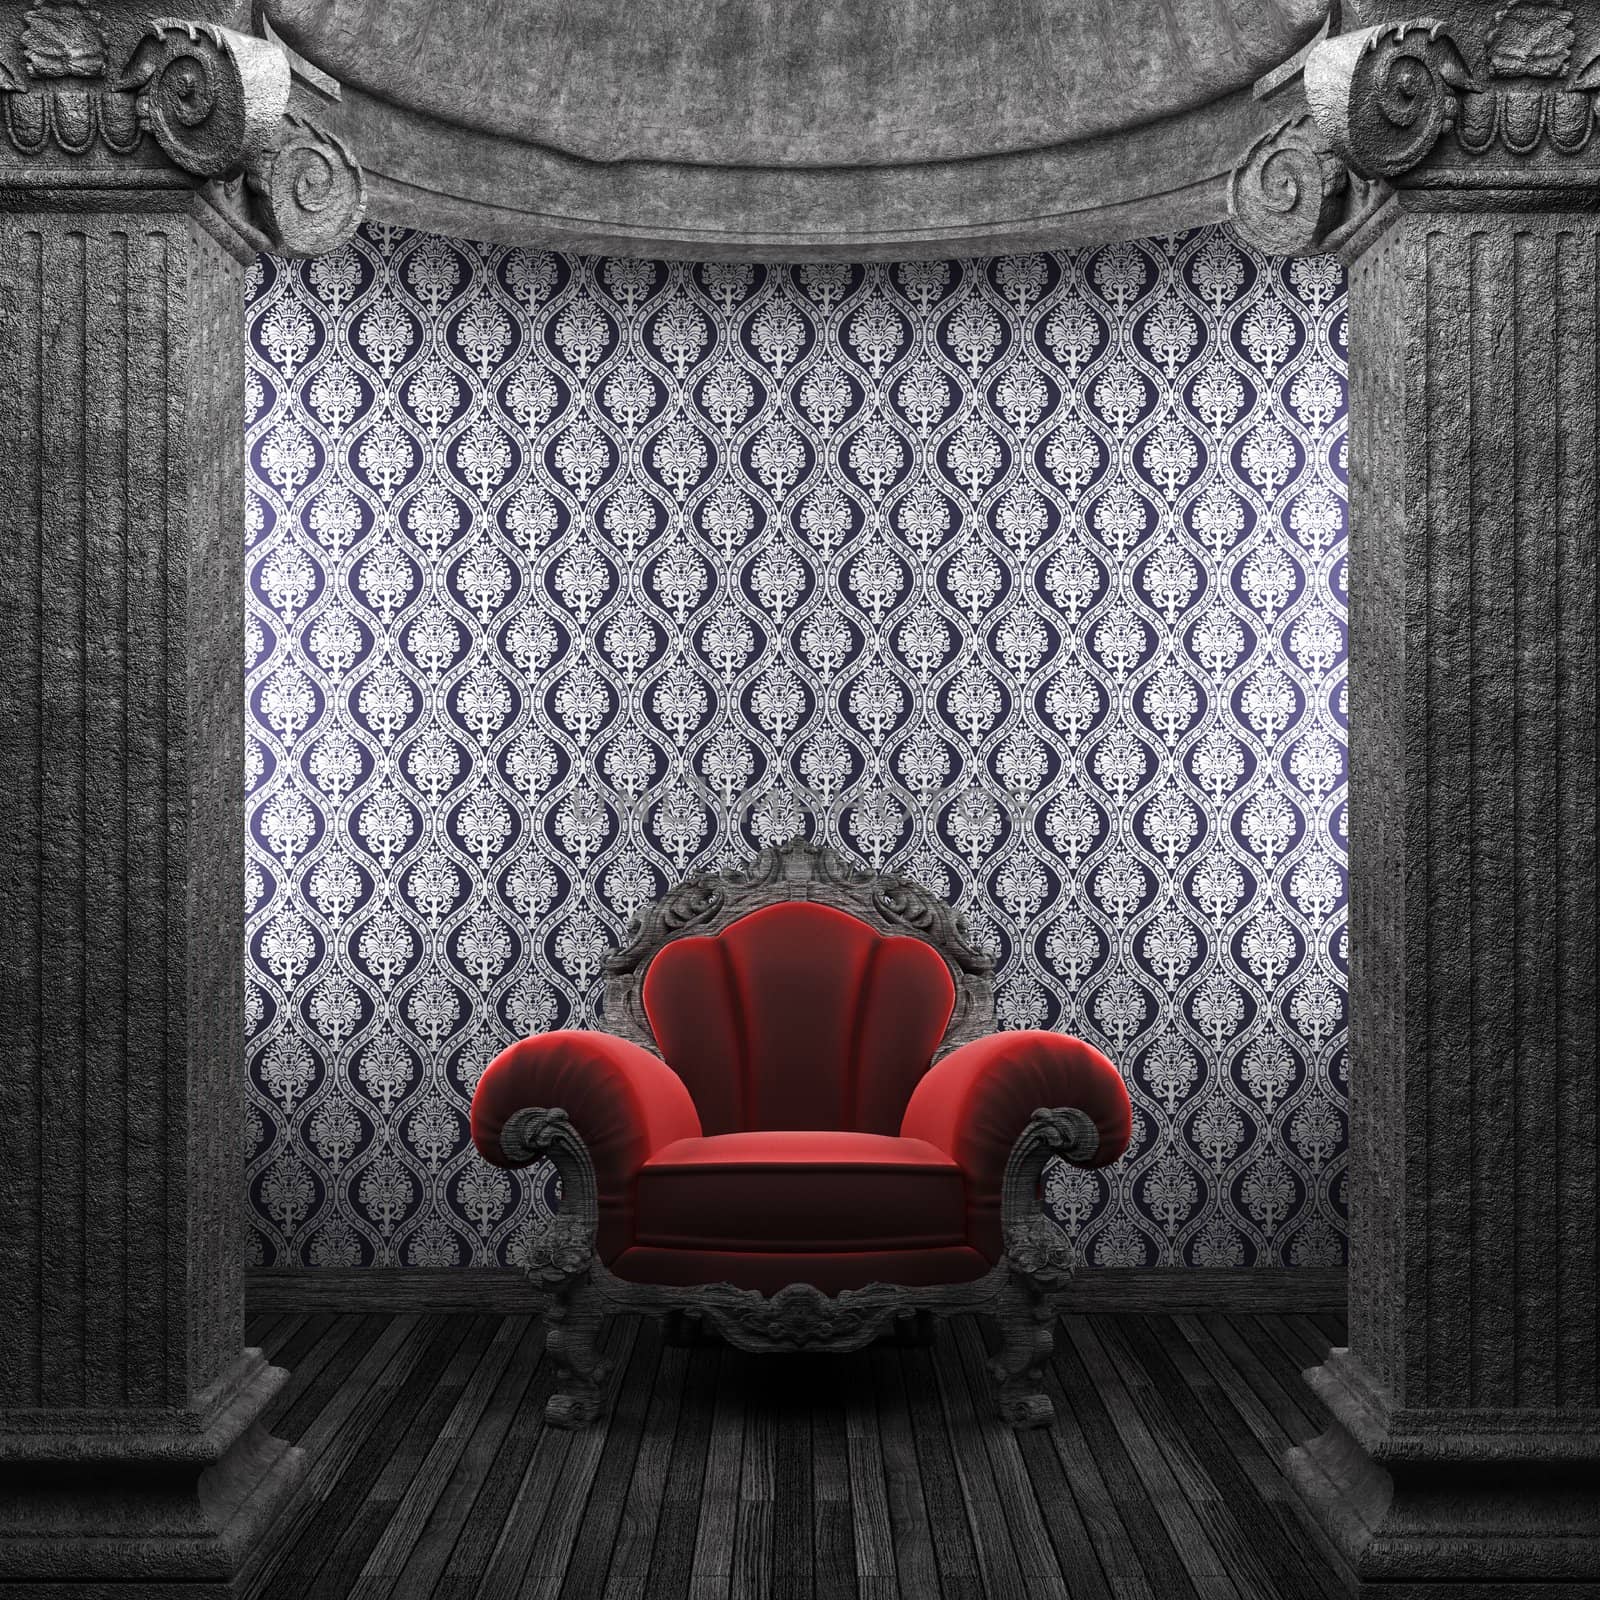 stone columns, chair and wallpaper by icetray